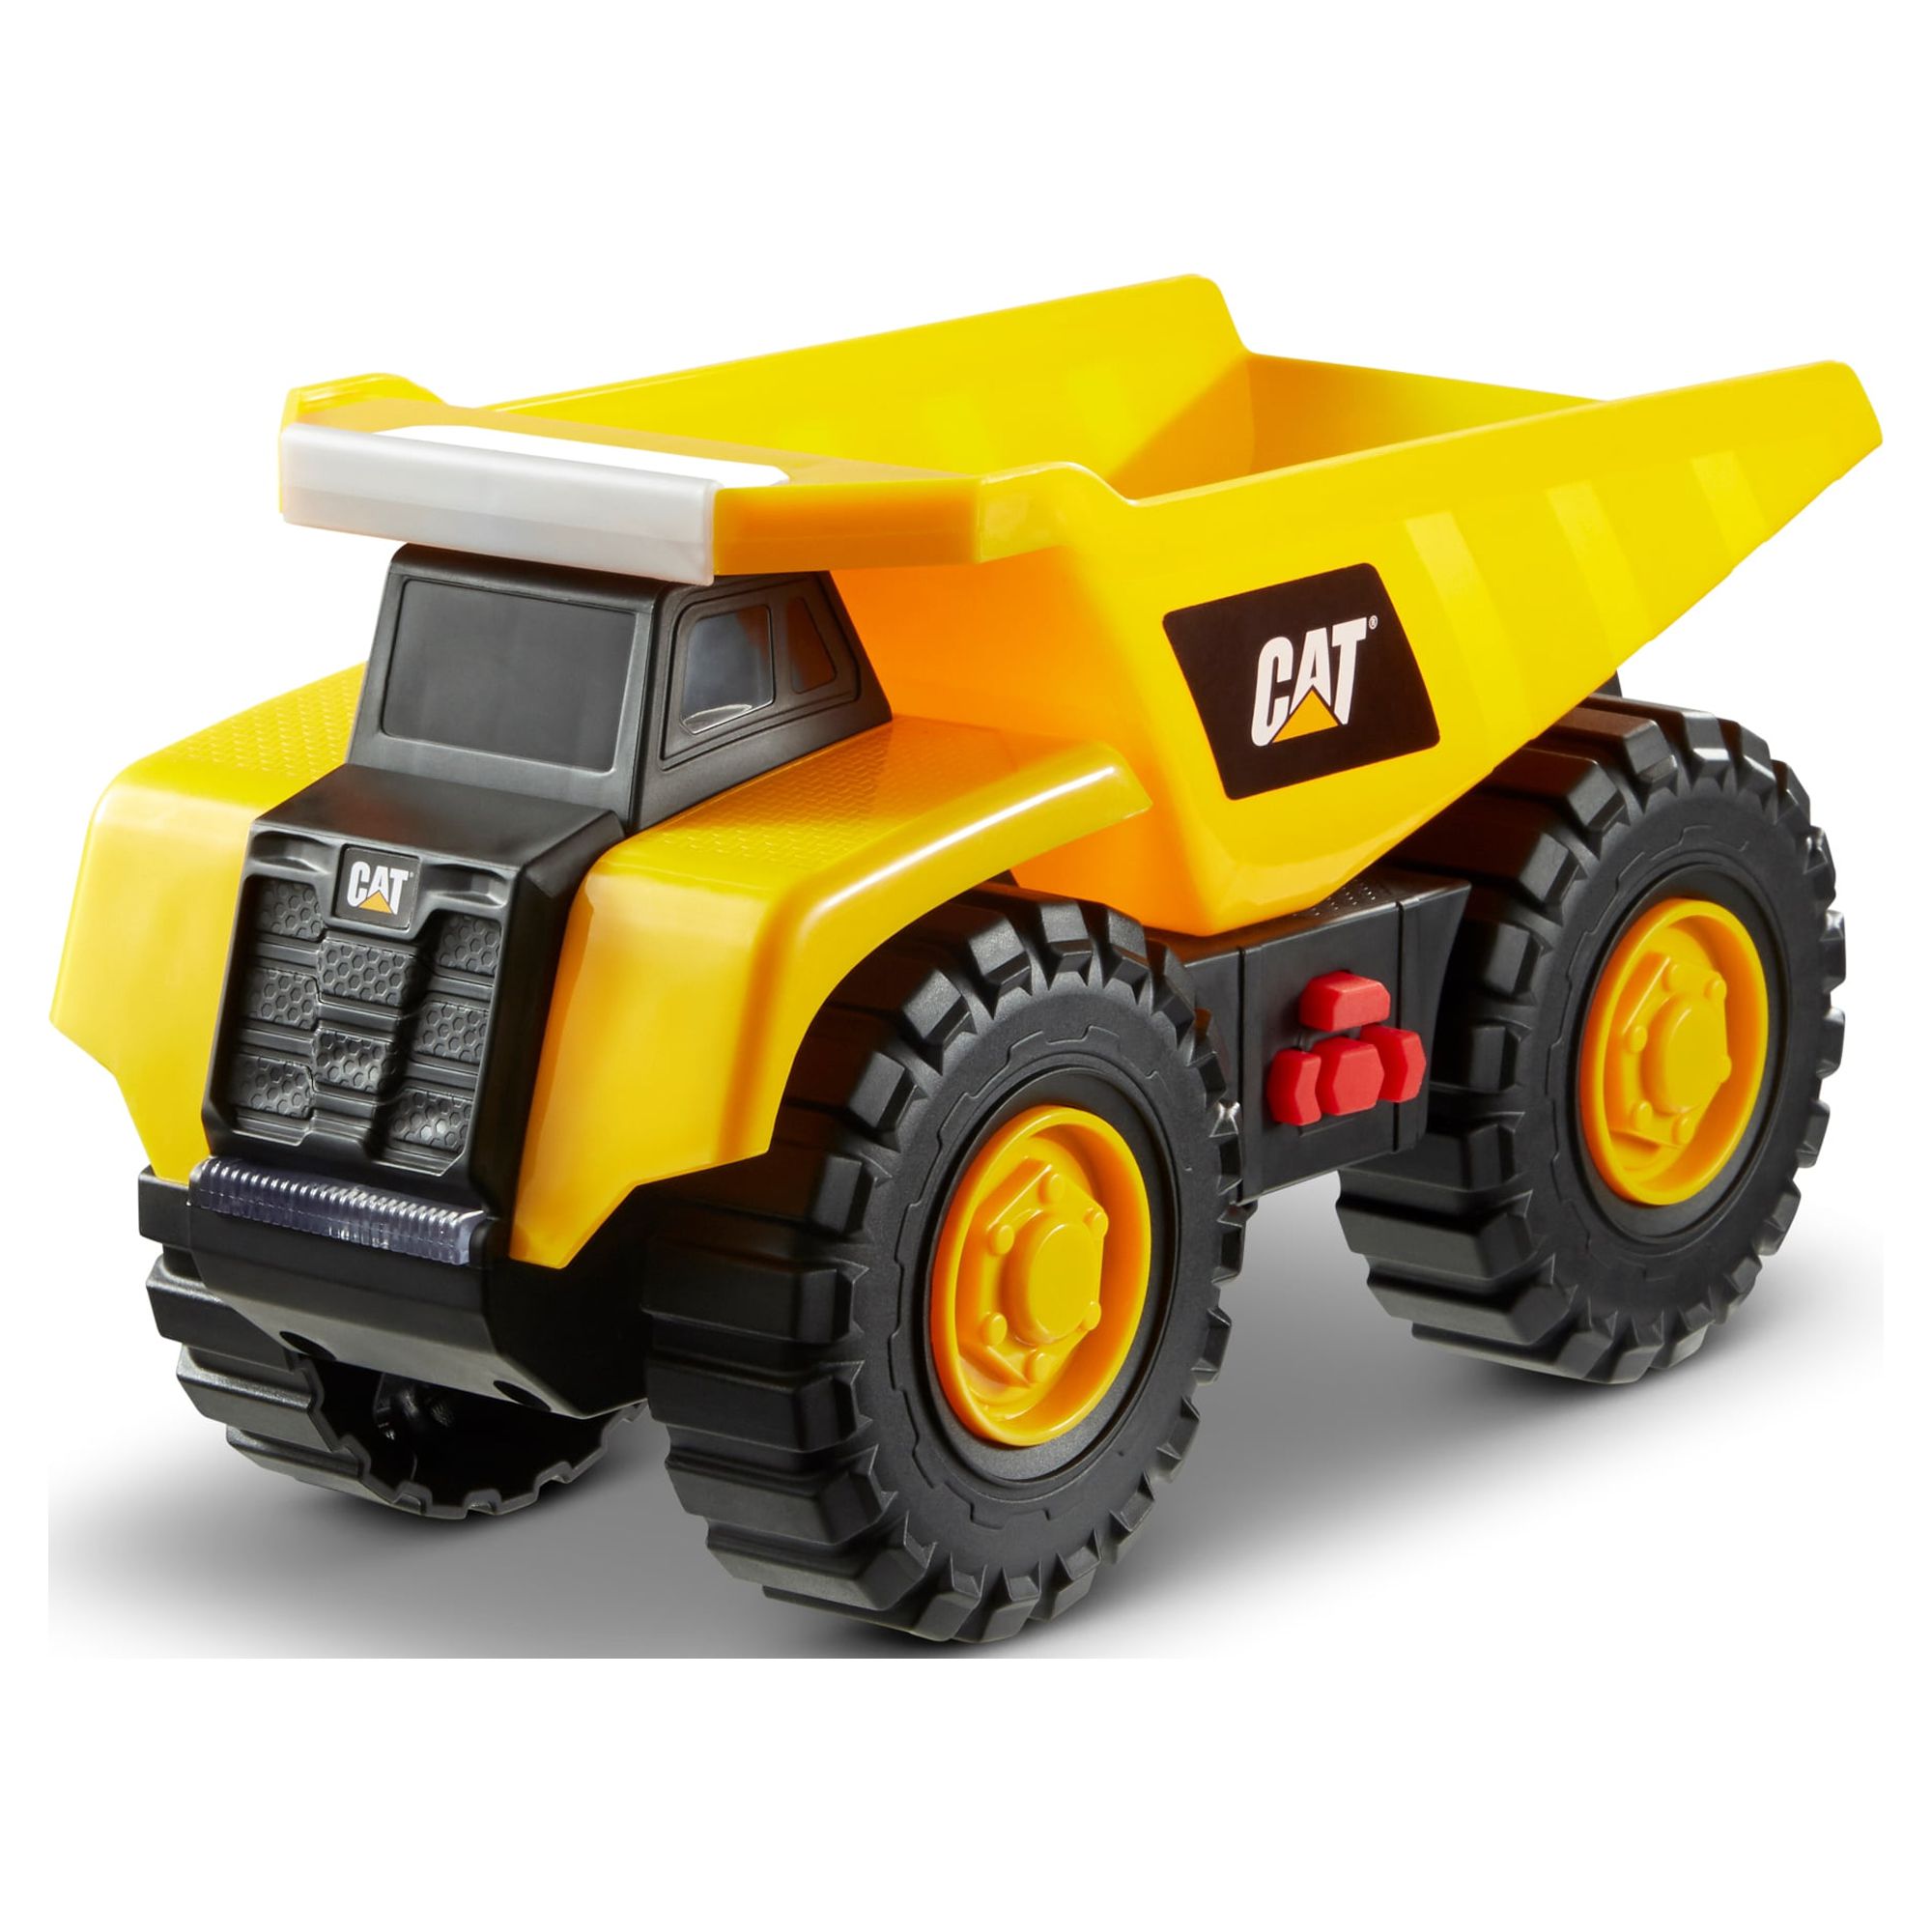 10" Cat Construction Tough Machines Dump Truck Toy w/ Lights & Sounds $6.95 + Free Shipping w/ Prime or on orders over $35